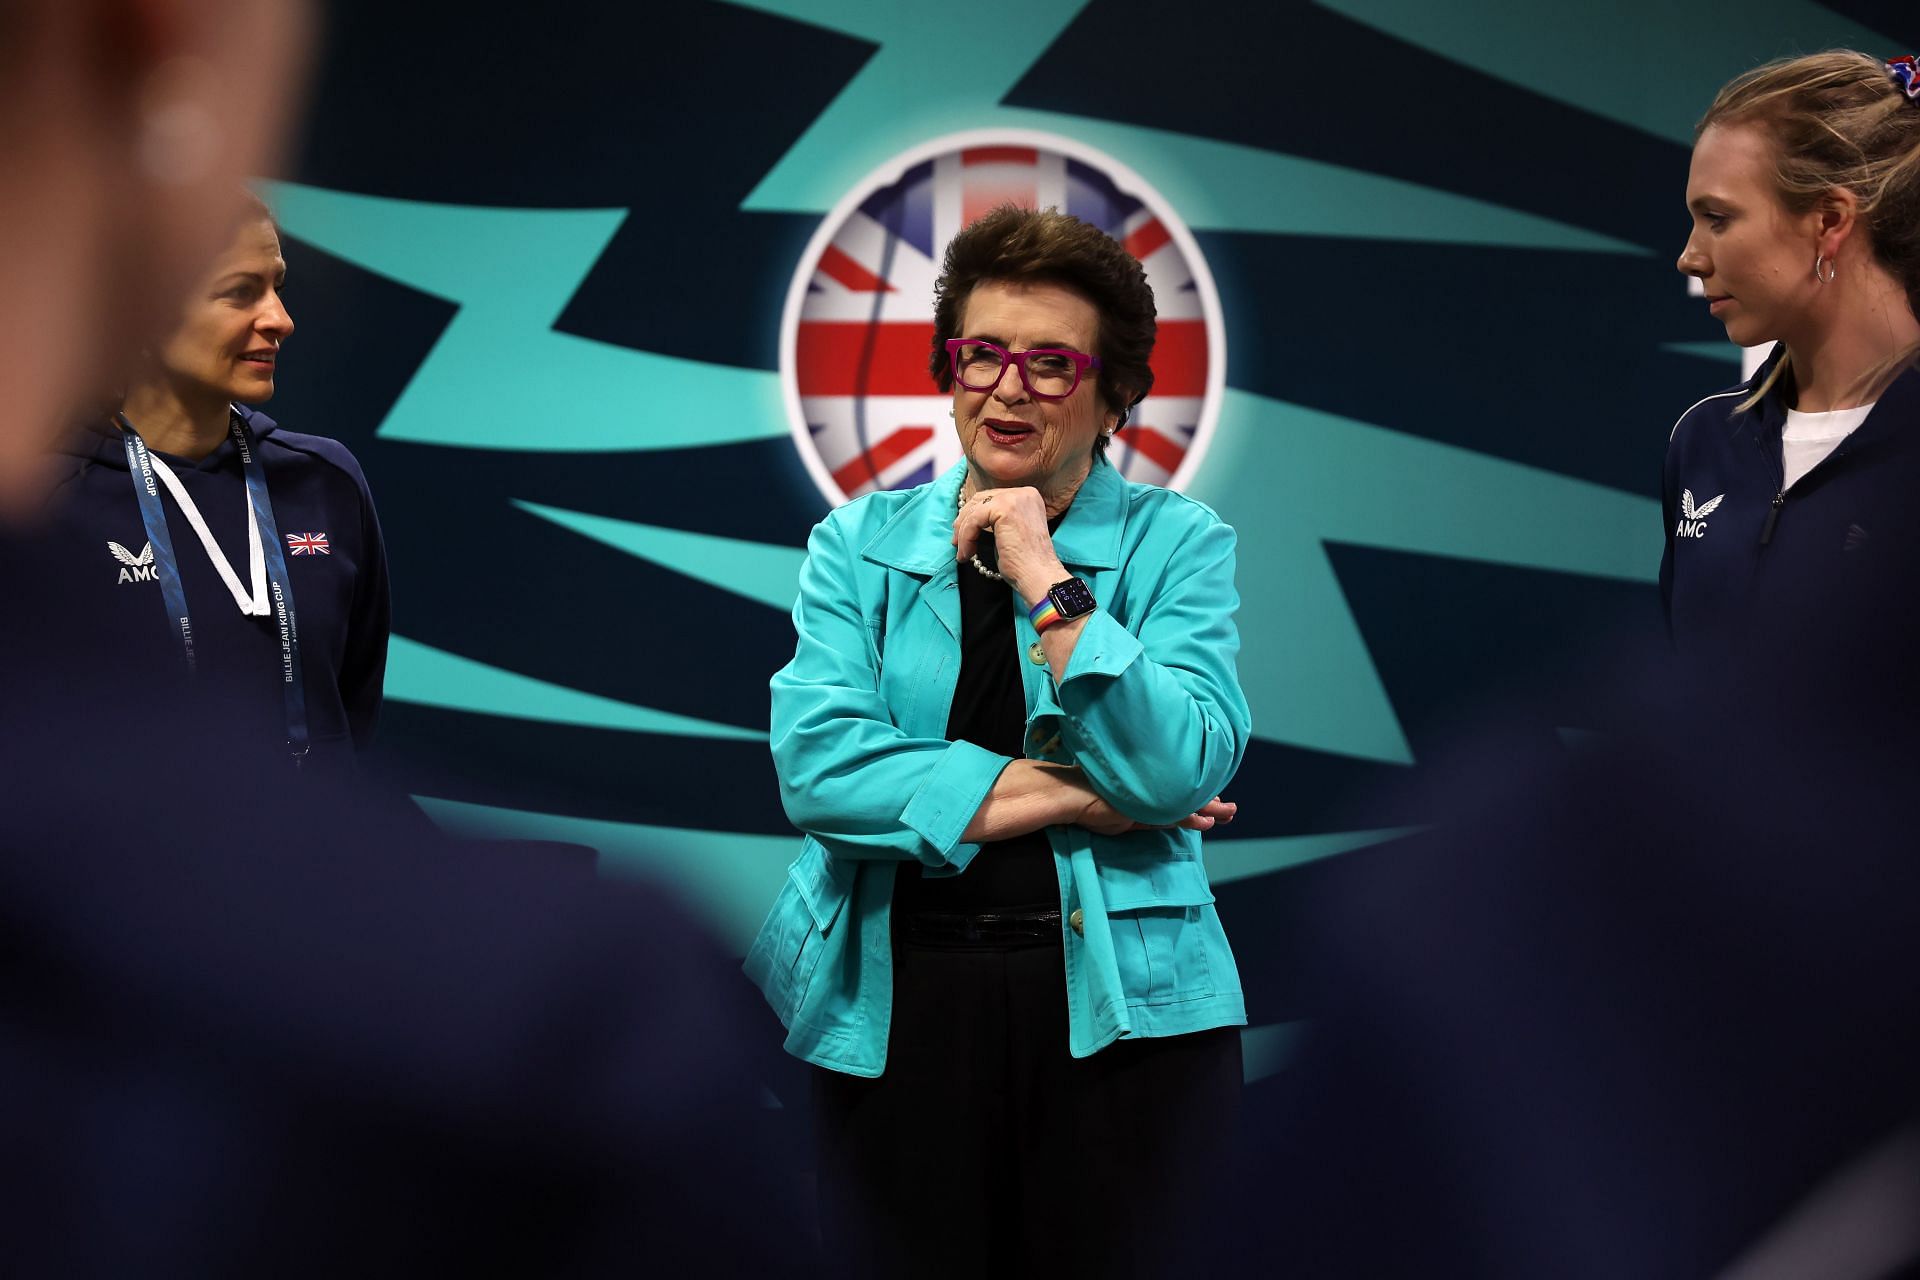 Billie Jean King fought to remove the all-white dress code at Wimbledon.